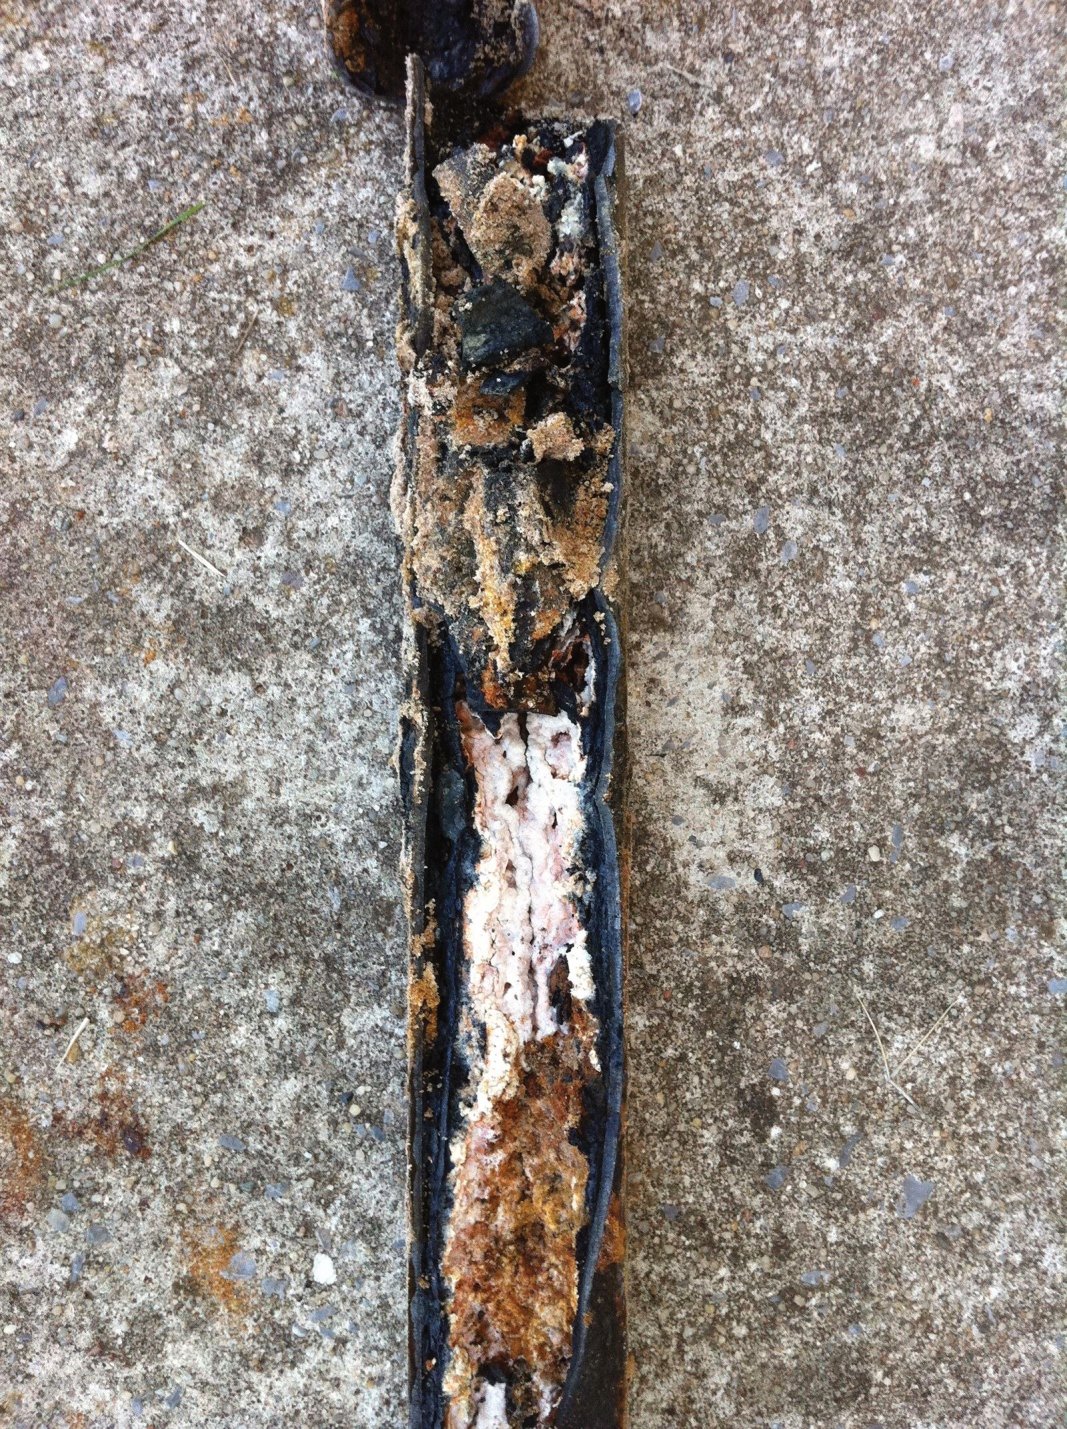 slab leak in a kitchen drain line, that is old food and grease!